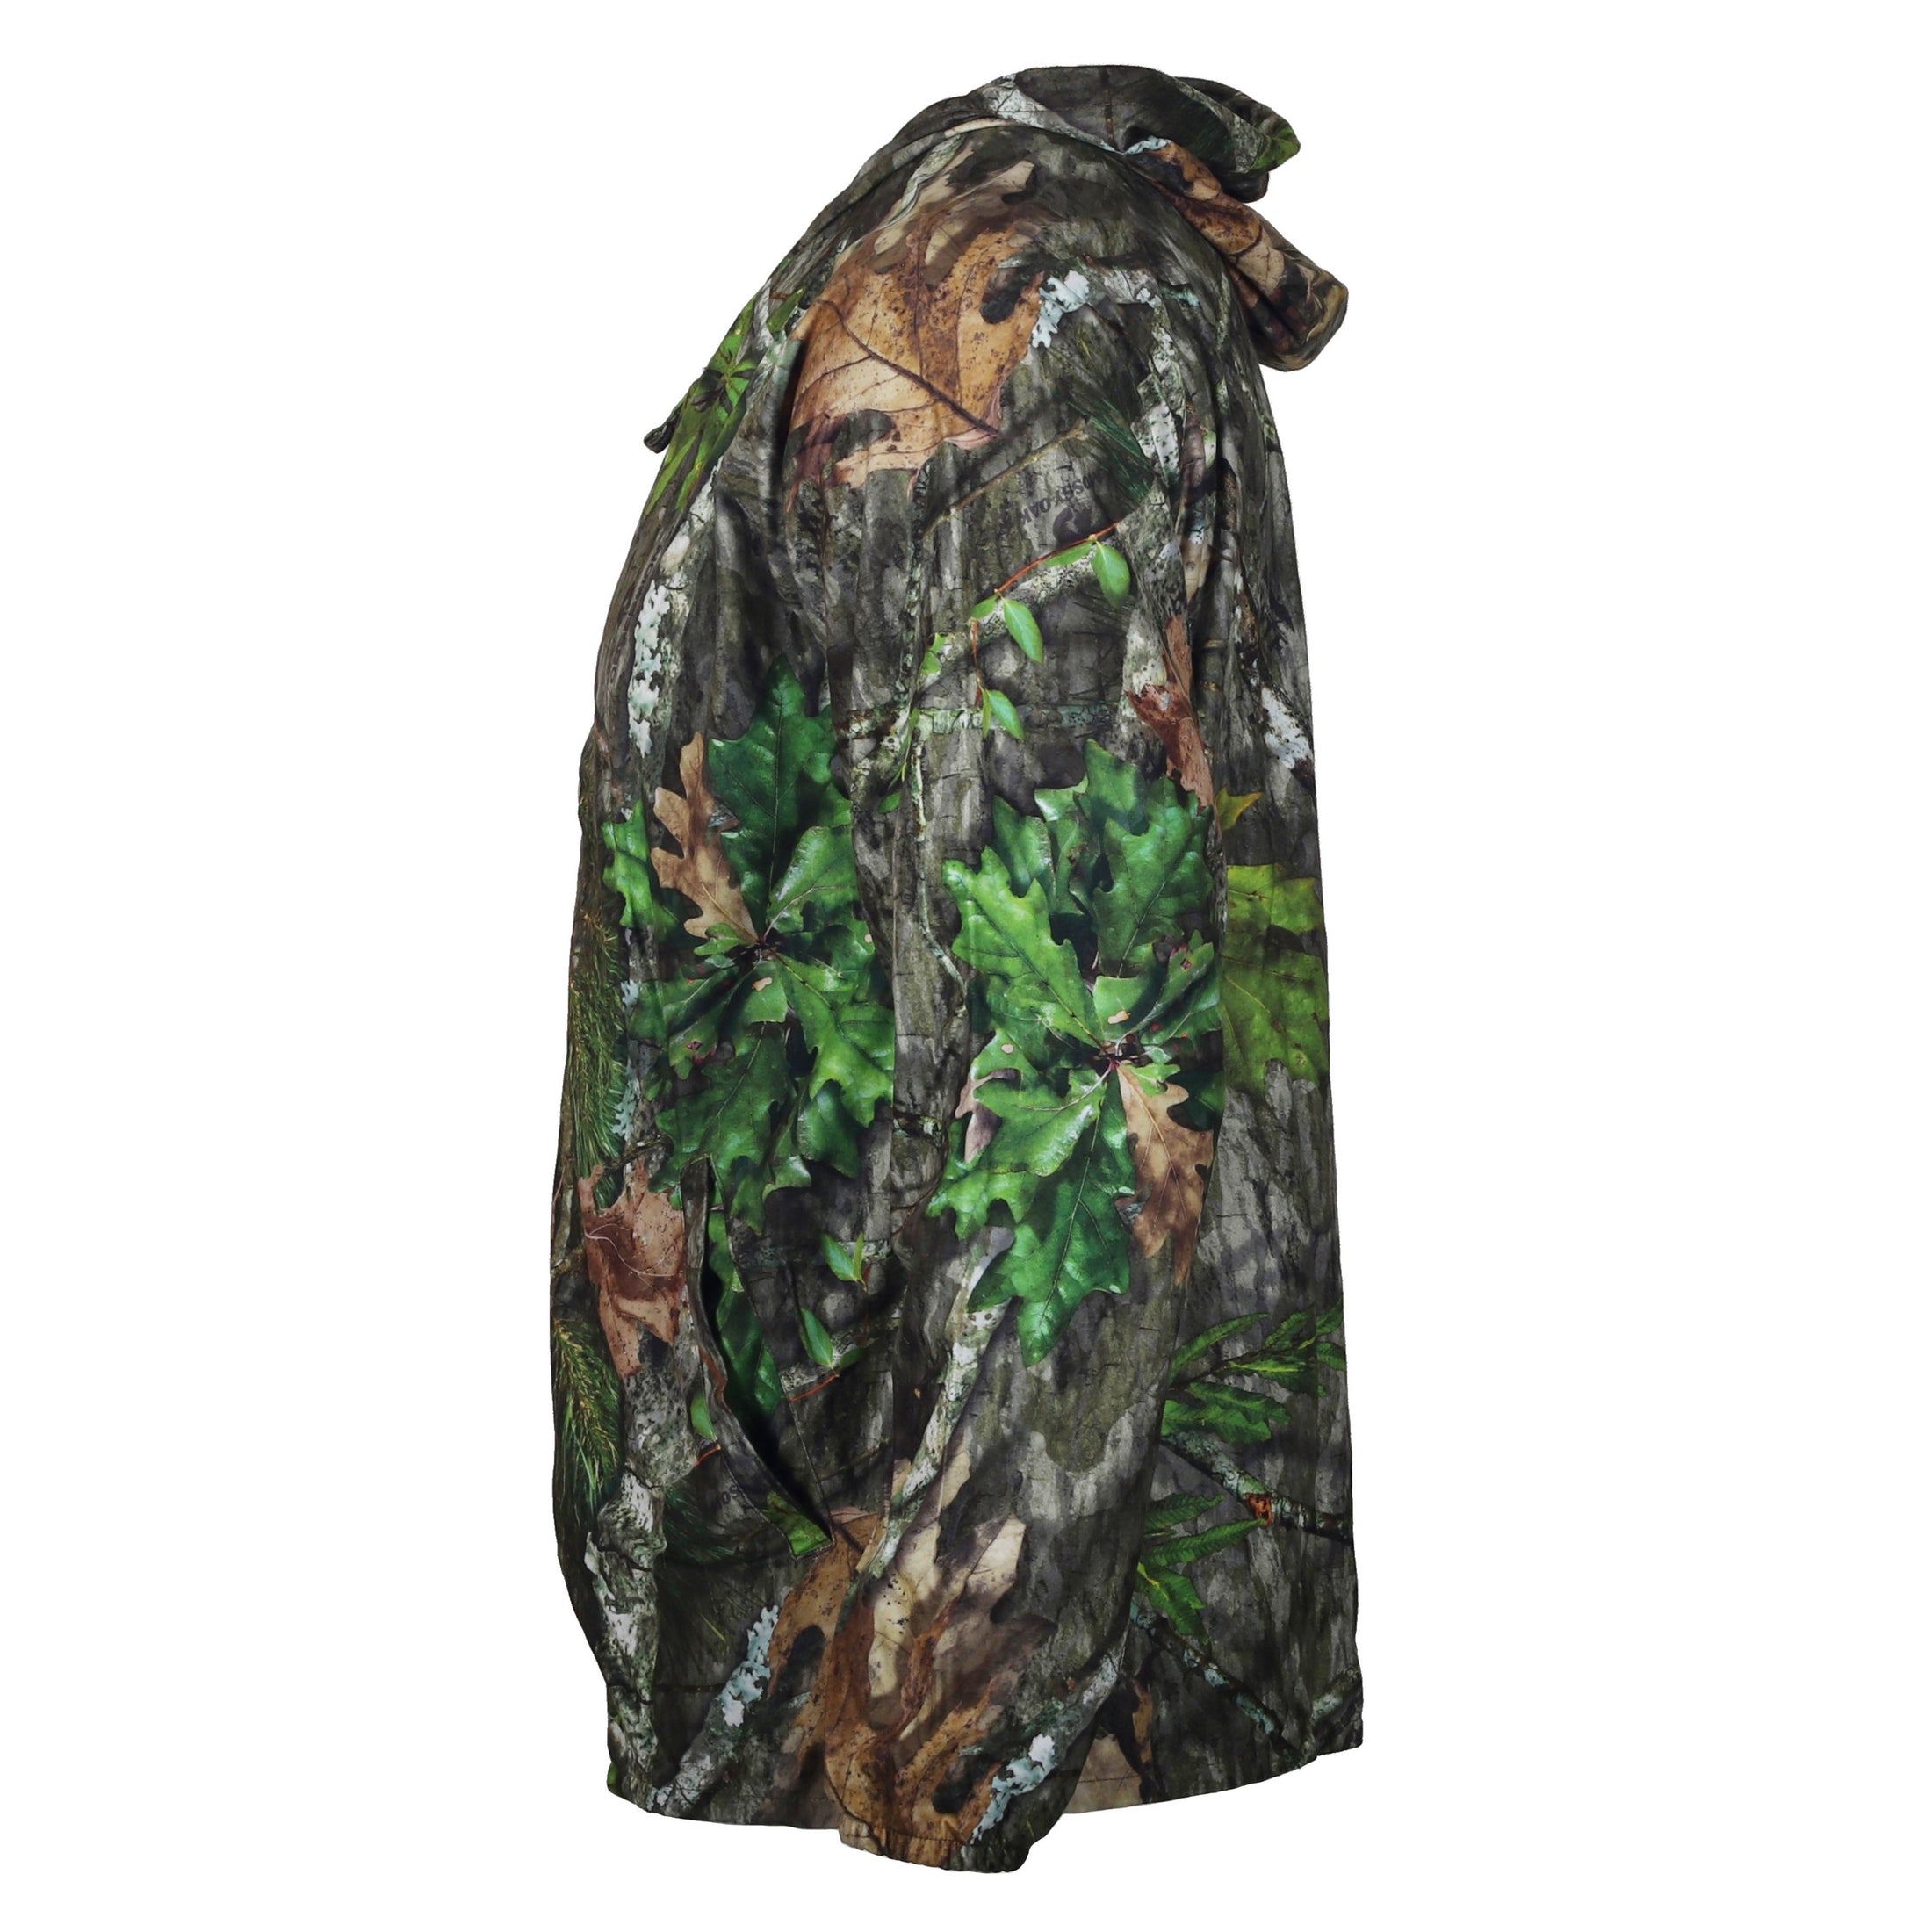 gamehide ElimiTick Insect Repellent Cover Up Jacket side (mossy oak obsession)